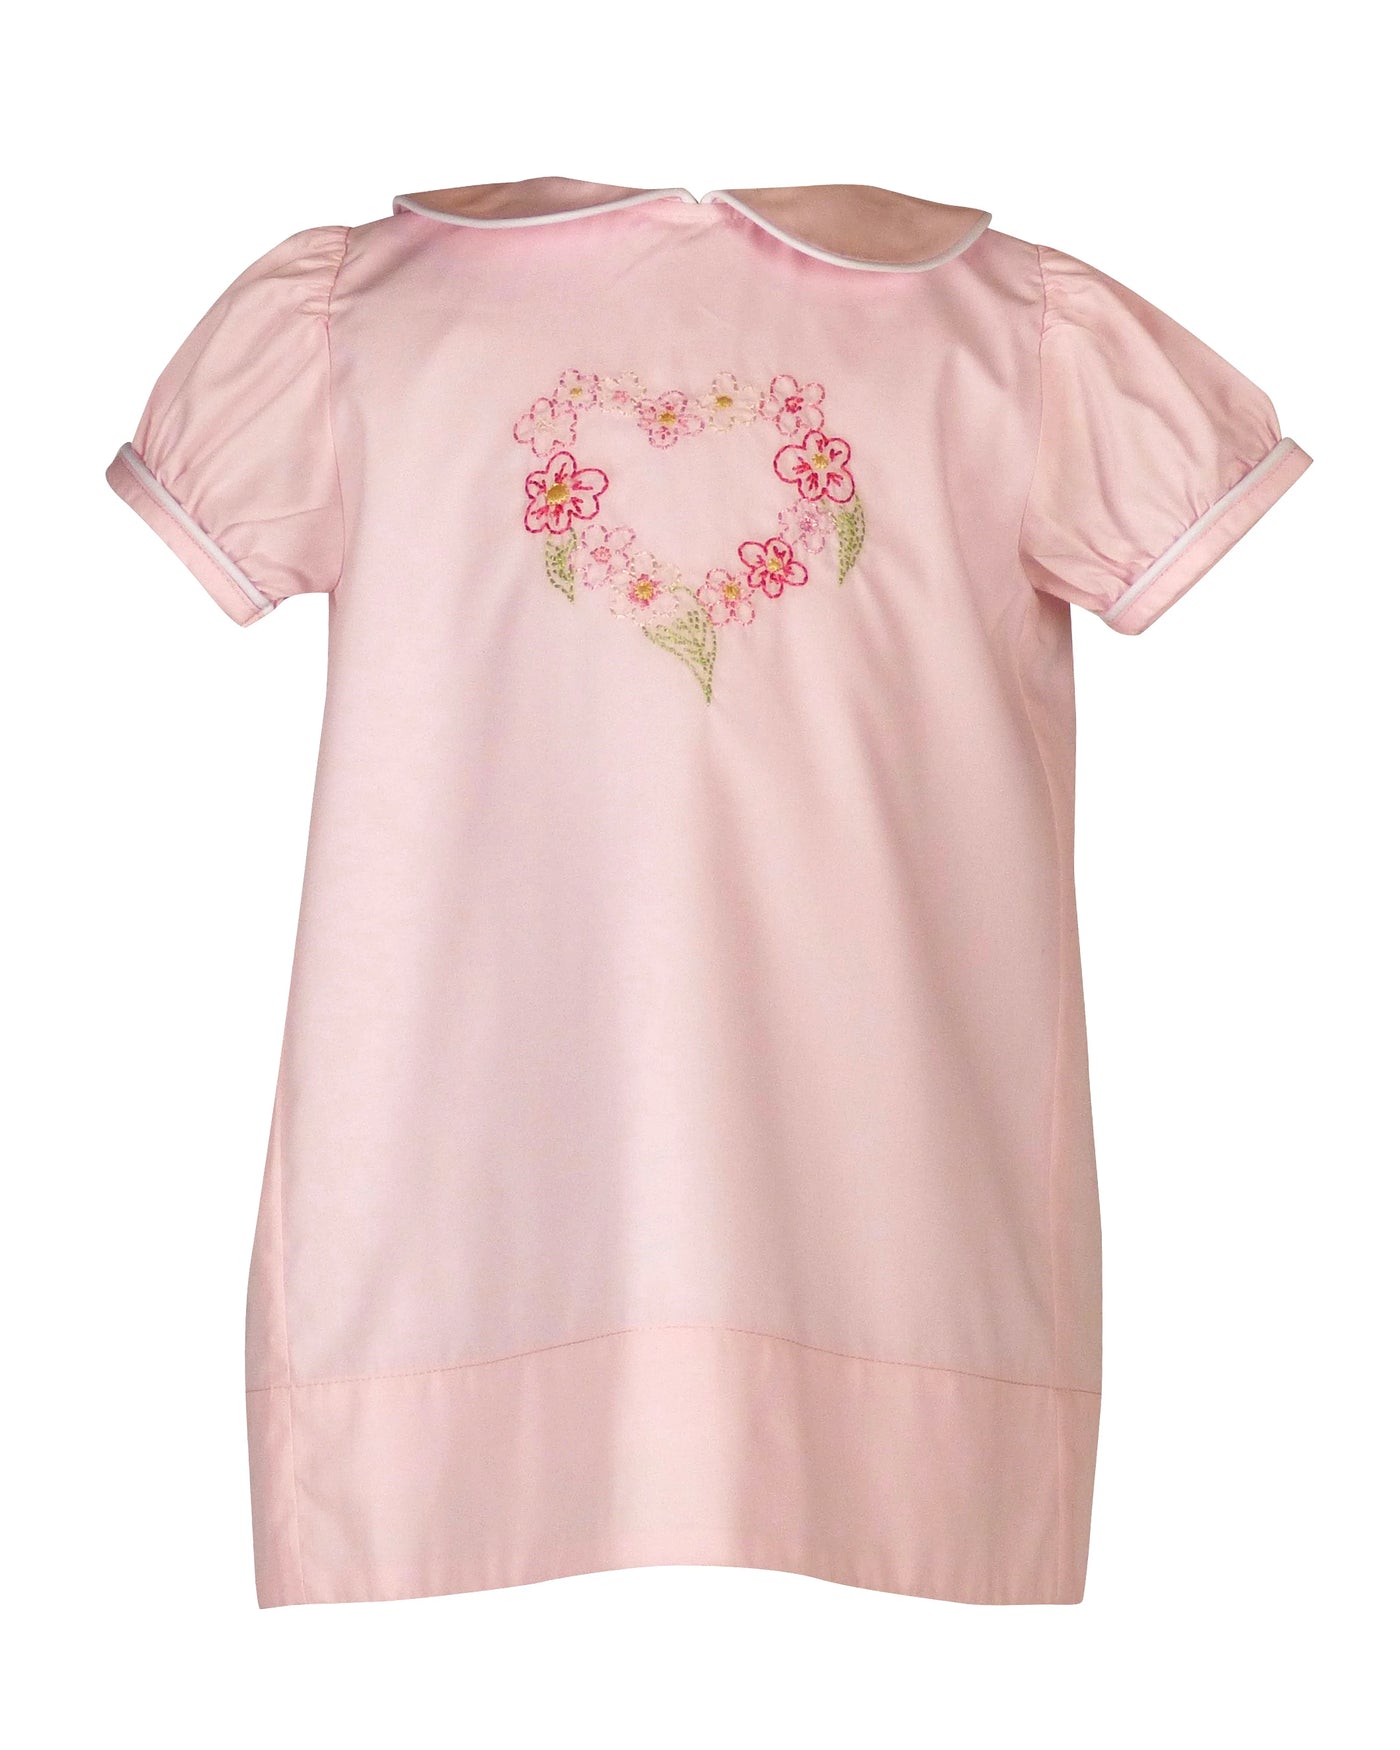 Lovey Dovey Daygown